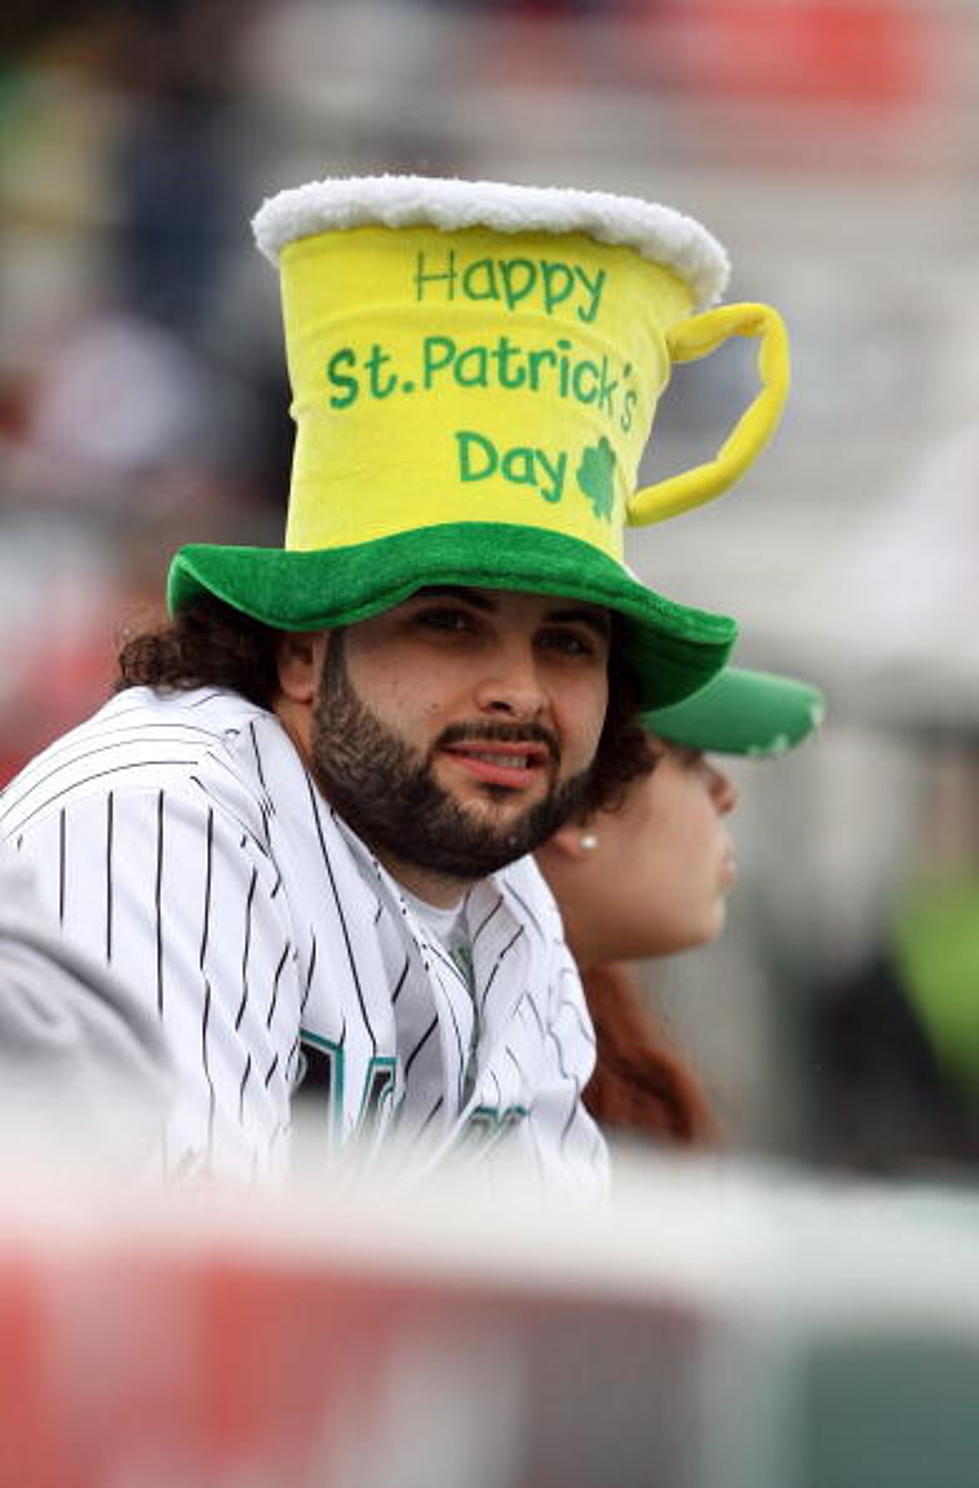 And Now, Five Random Facts About St. Patrick’s Day